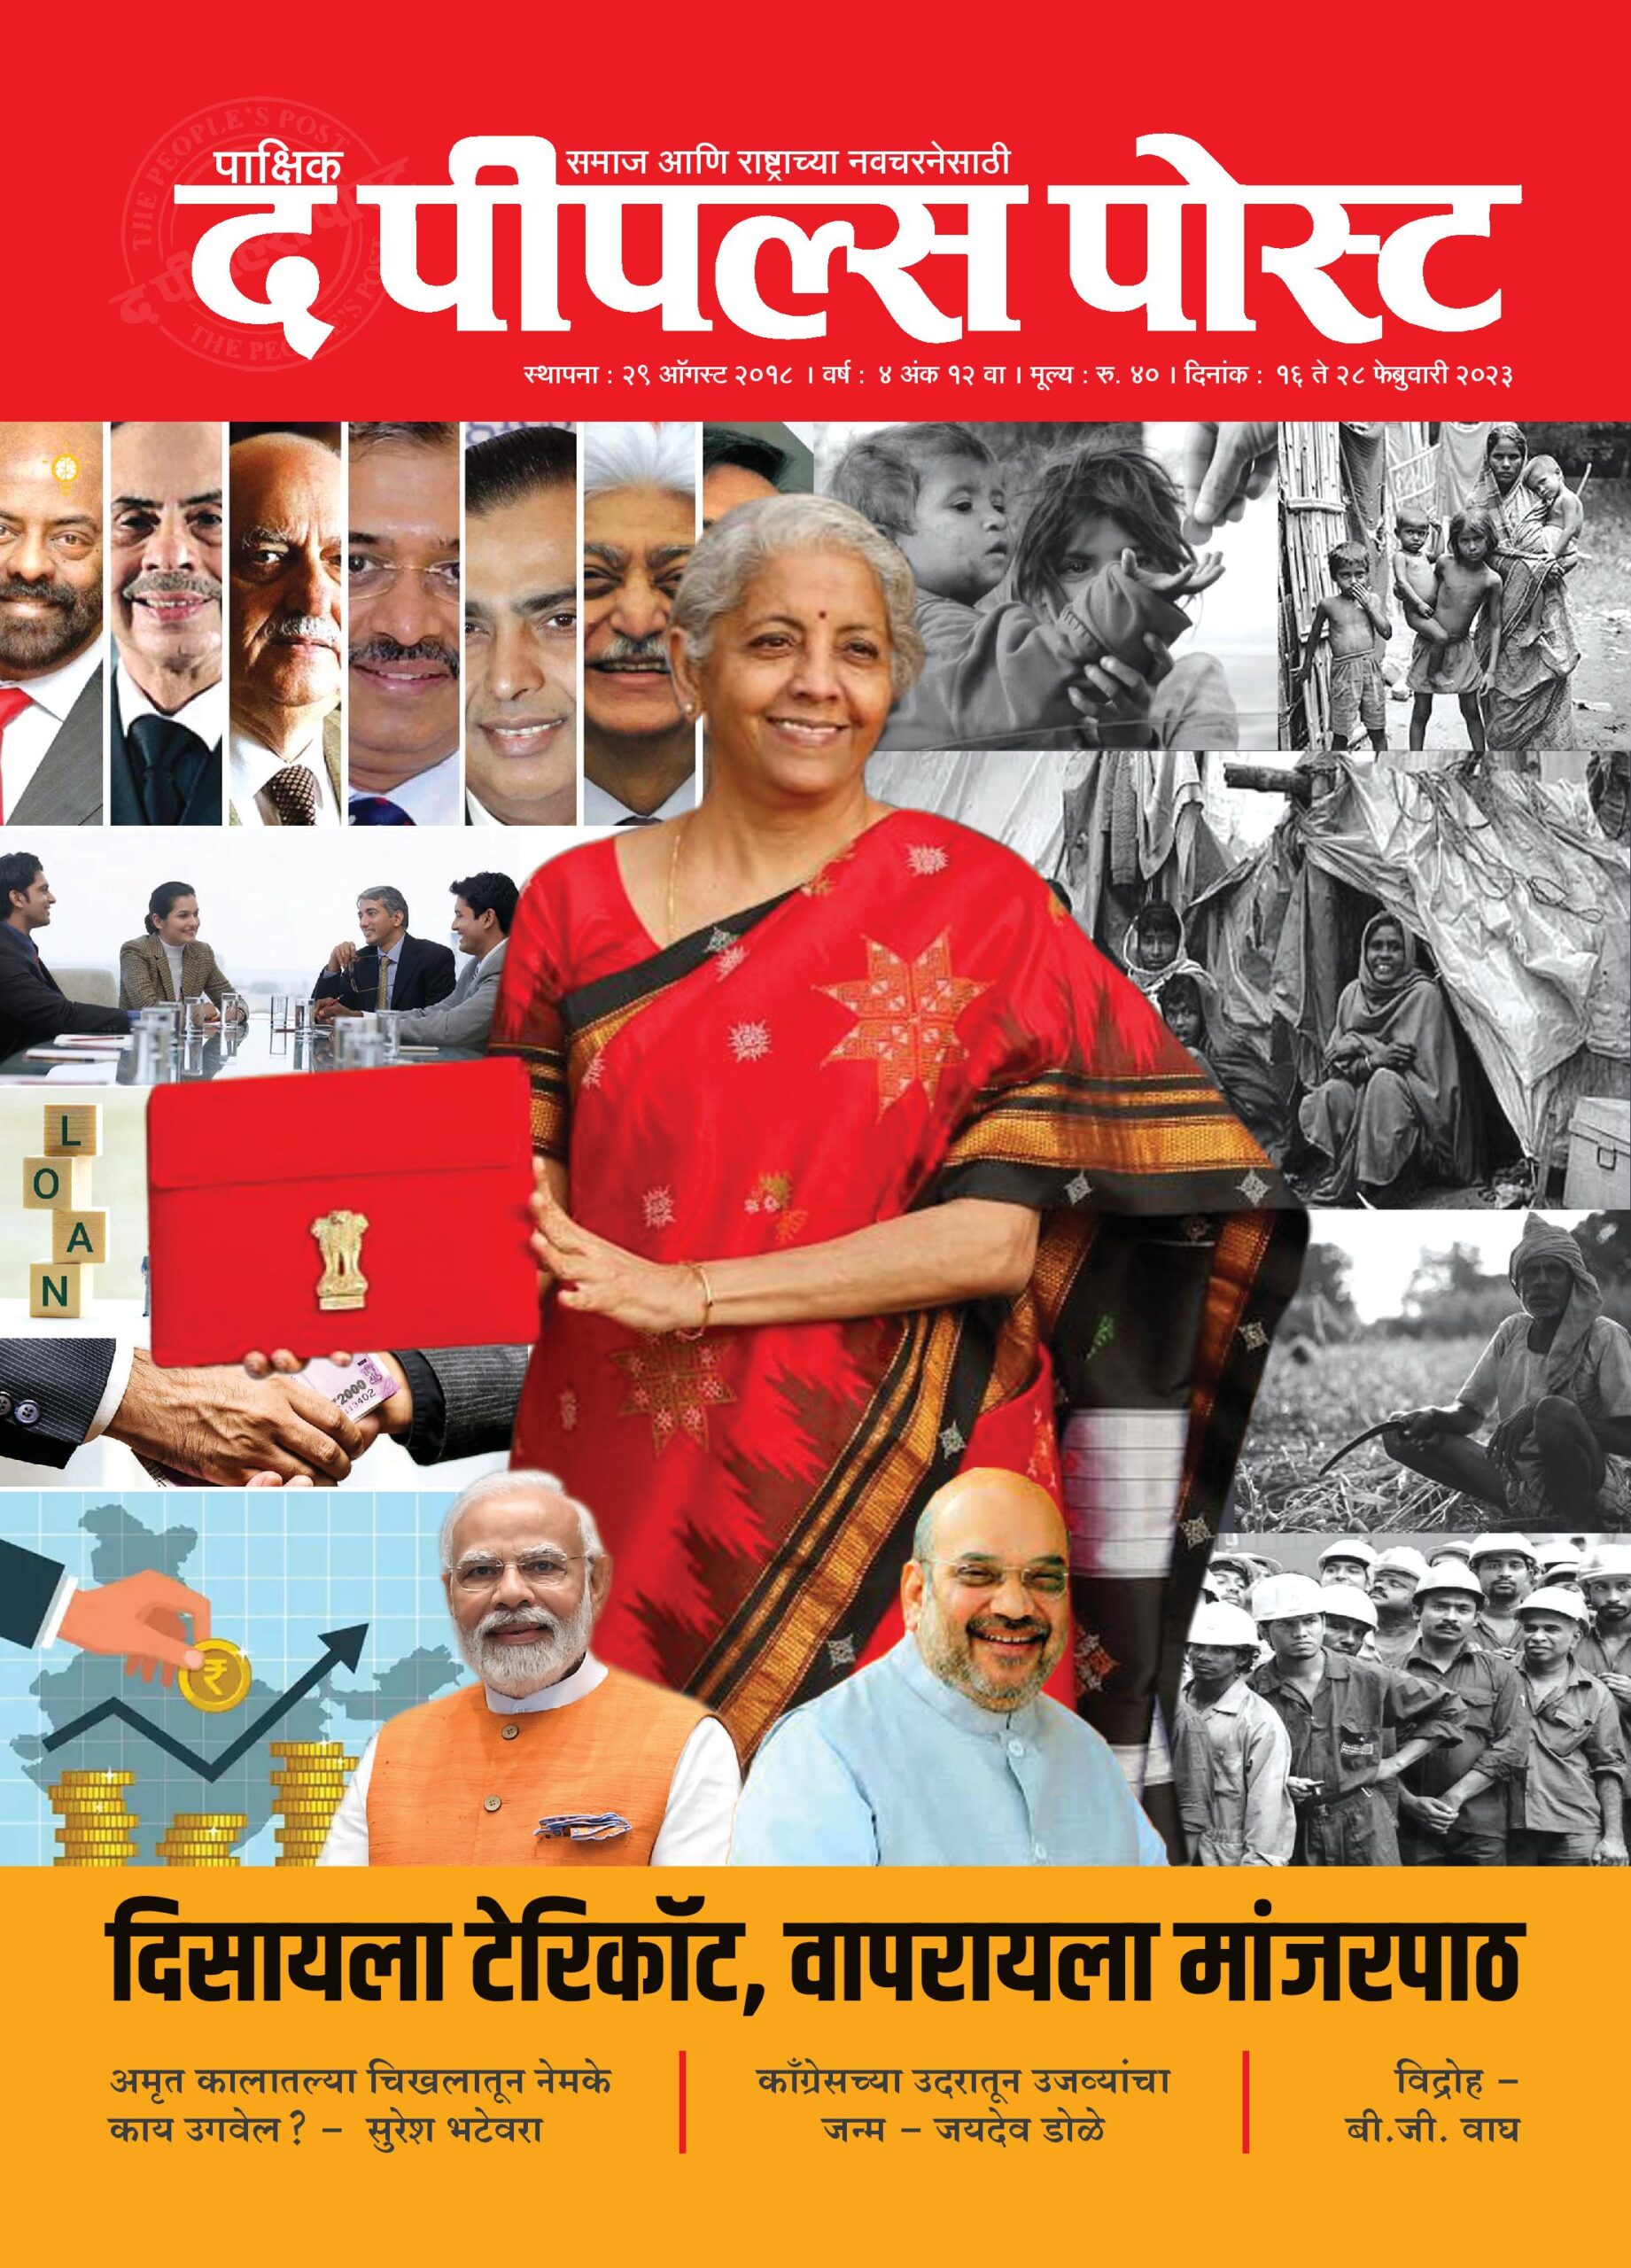 The People’s Post Issued 16 February 2023 – 28 February 2023 issue